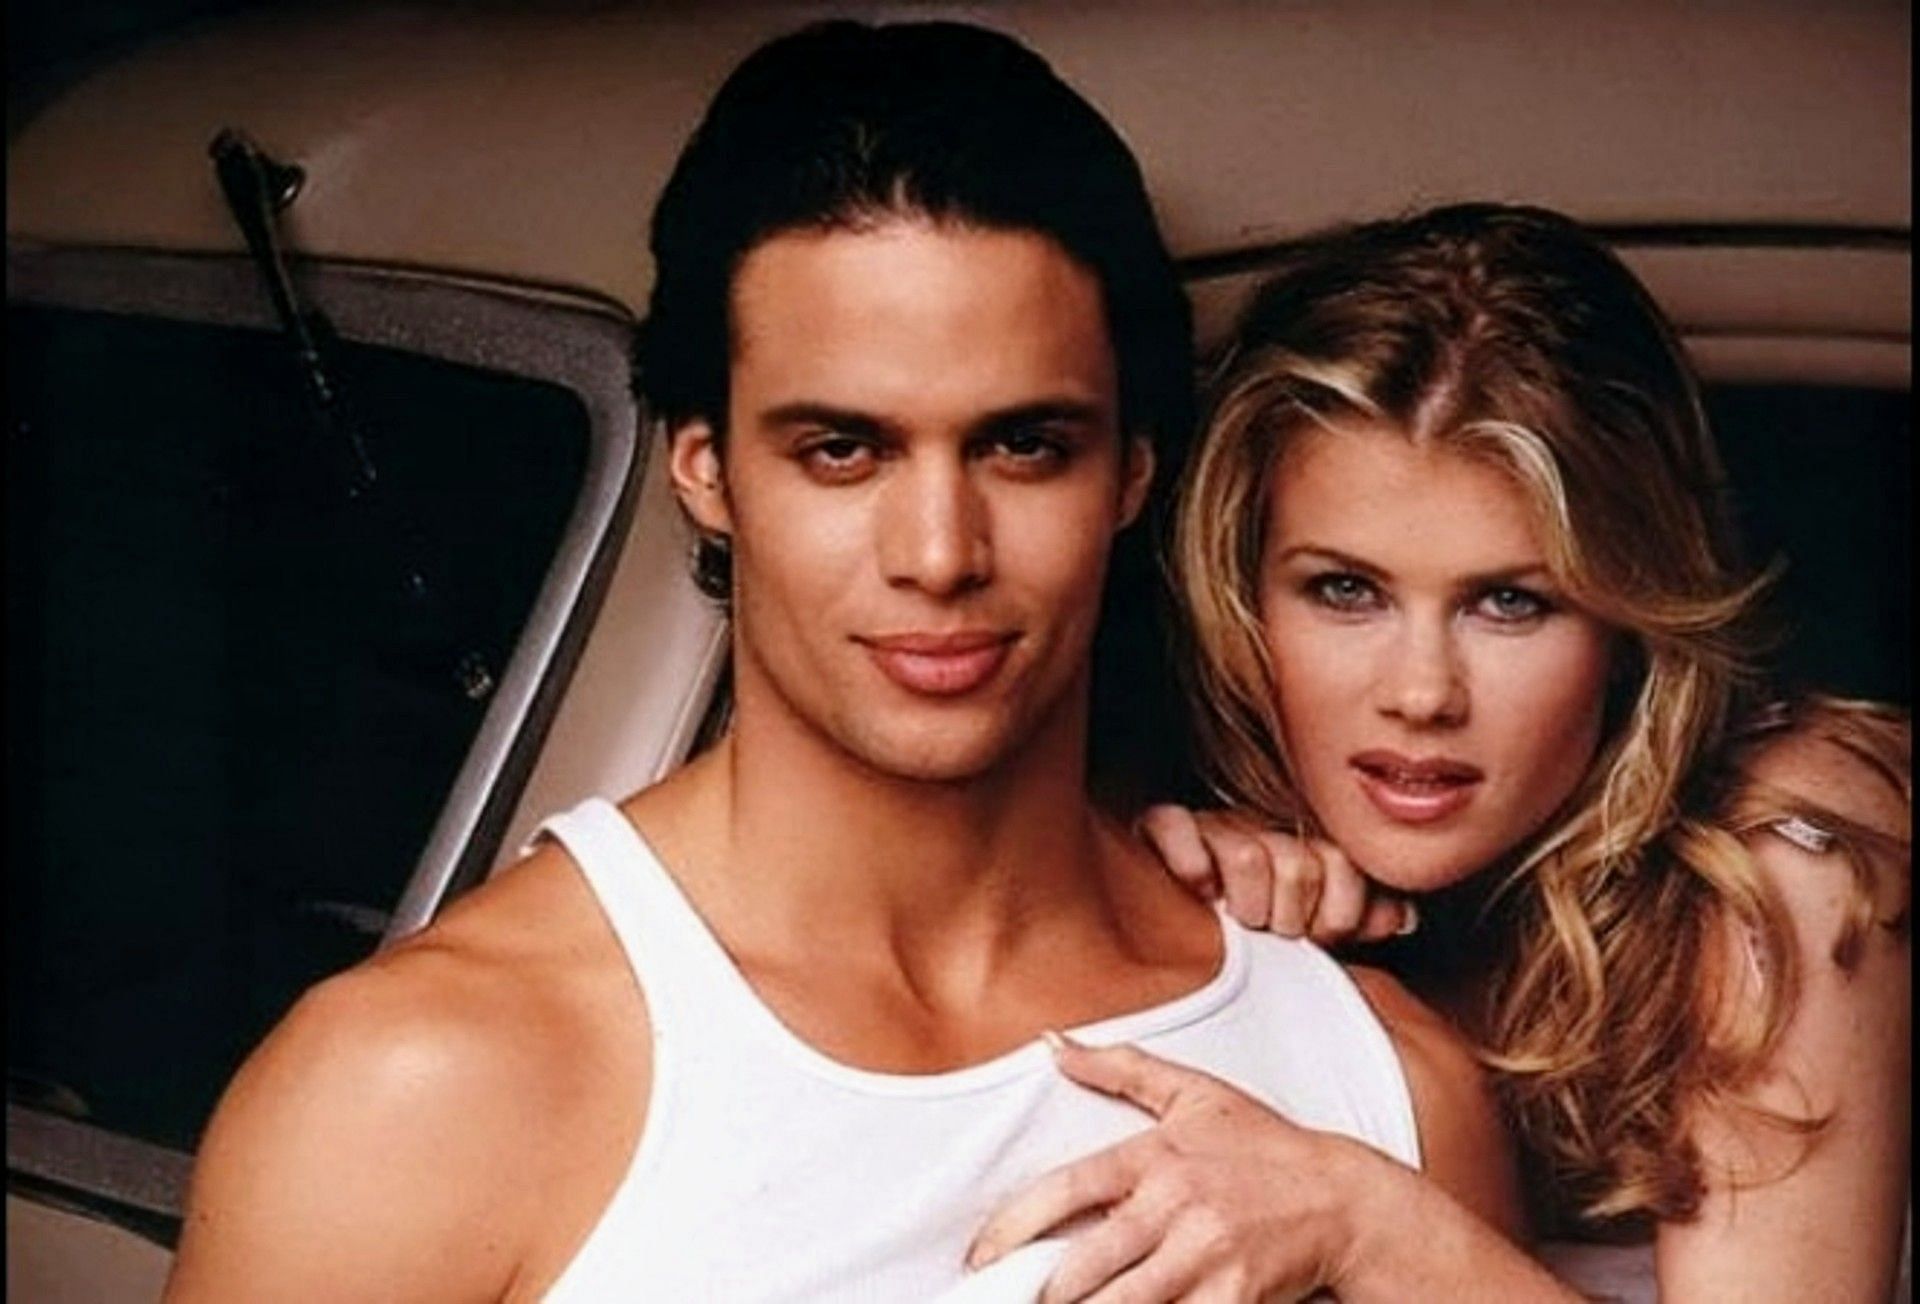 Matt Cede&ntilde;o and Alison Sweeney in Days of Our Lives (Image via NBC)